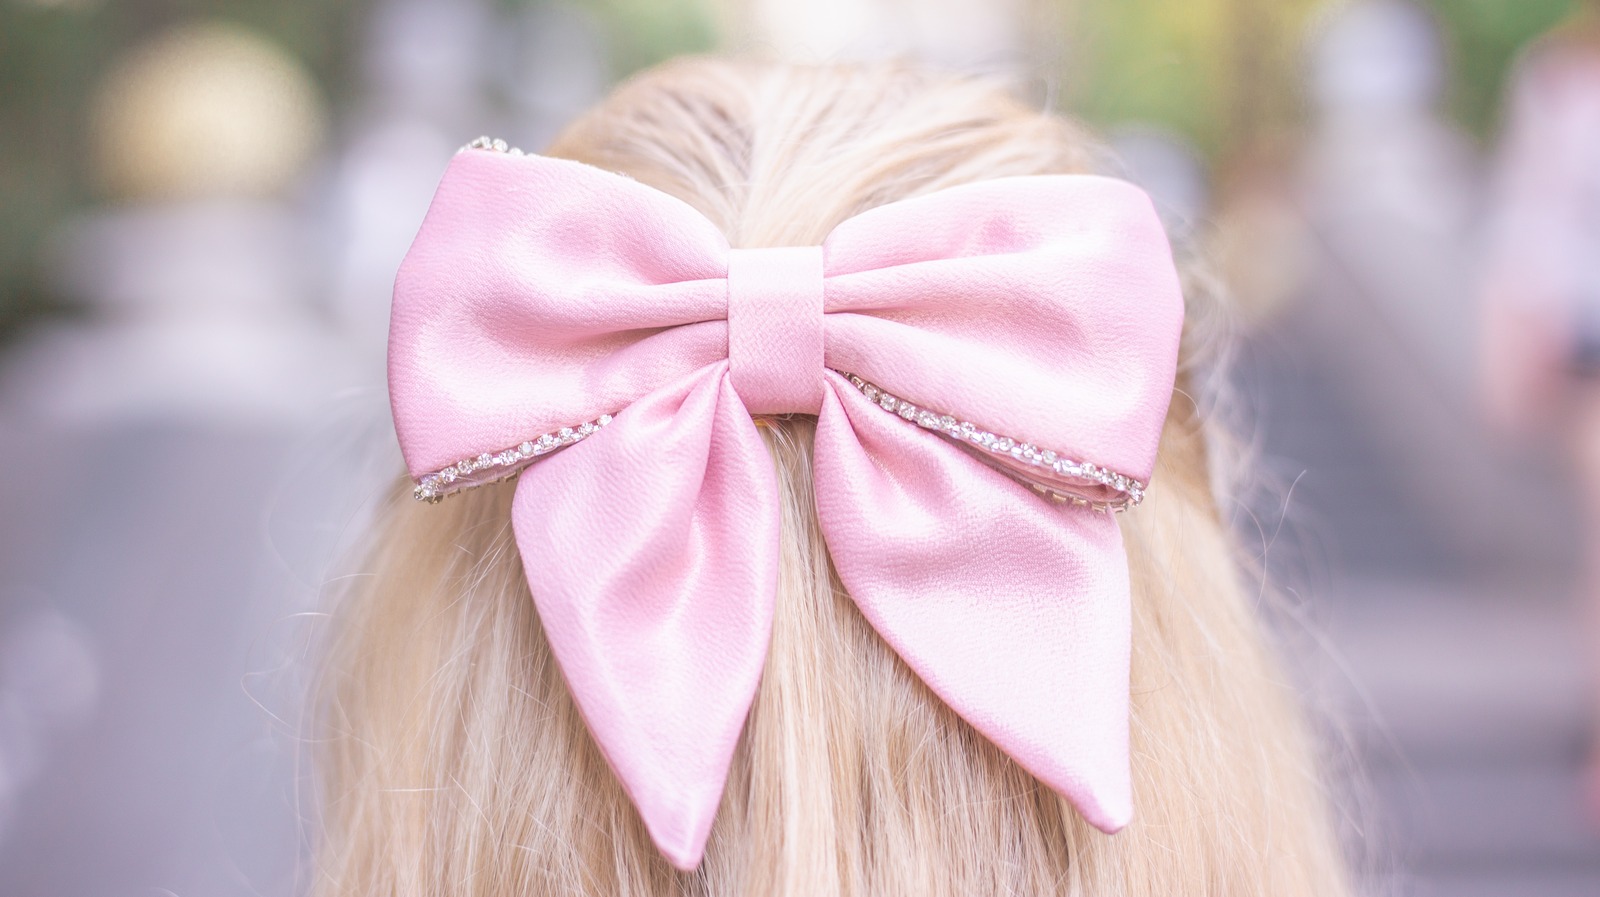 Pink bow and curled ends  Let your hair down, Pink hair, Long hair styles